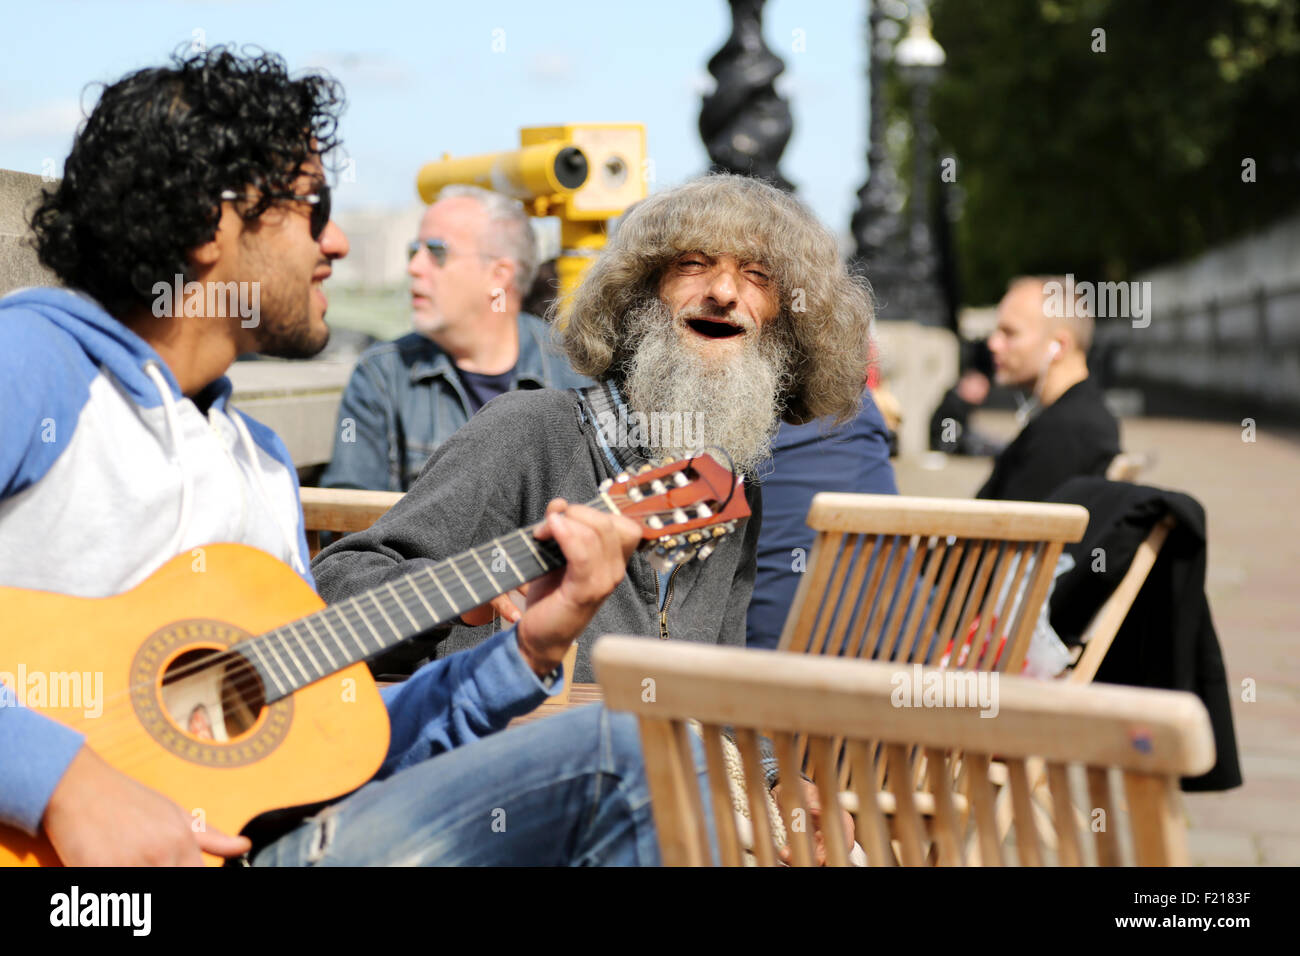 A busker playing an acoustic guitar entertains customers outside a coffee takeaway stall on londons southbank on a sunday morning. One eccentric guy. Stock Photo